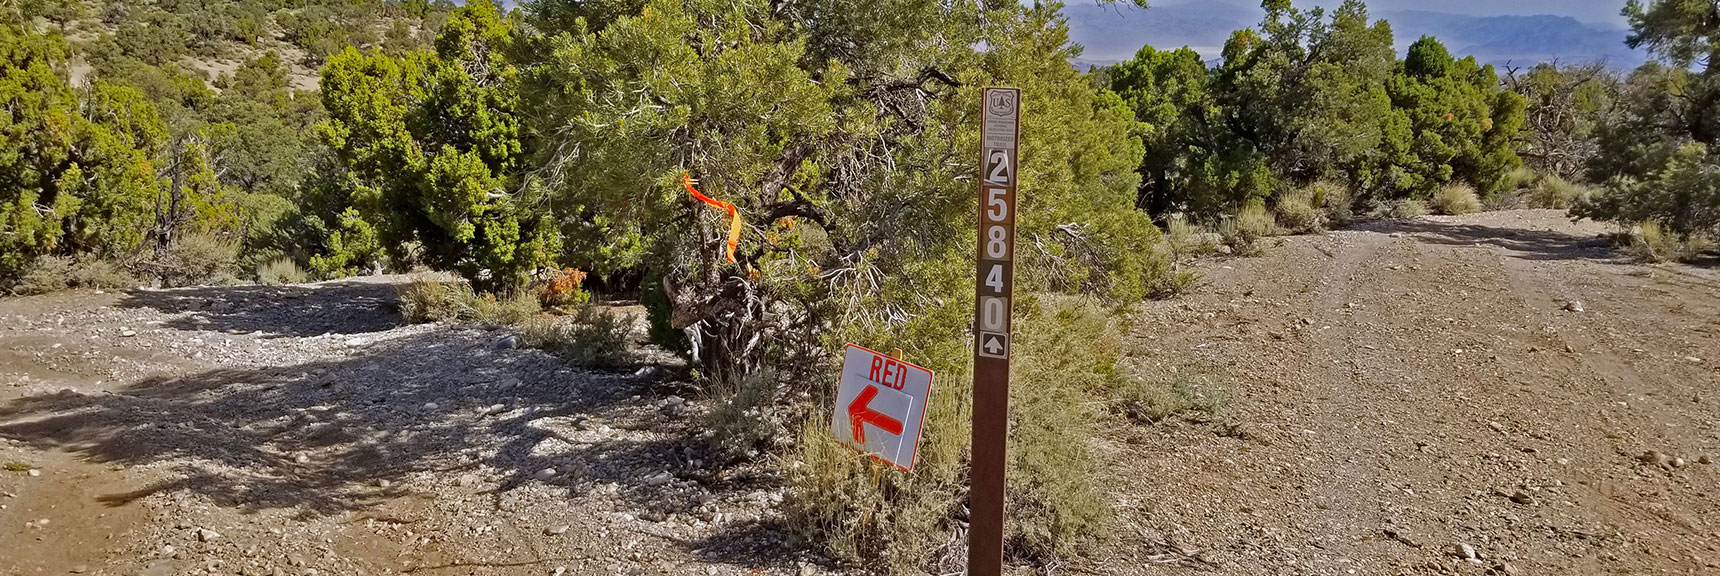 Beginning of Multiple Road Intersections. No Permanent Marker Indicating Where the Trail Goes. Temp Running Event Marker. | Pinyon Pine Loop Trail | Sawmill Trailhead | Lee Canyon | Mt Charleston Wilderness | Spring Mountains, Nevada